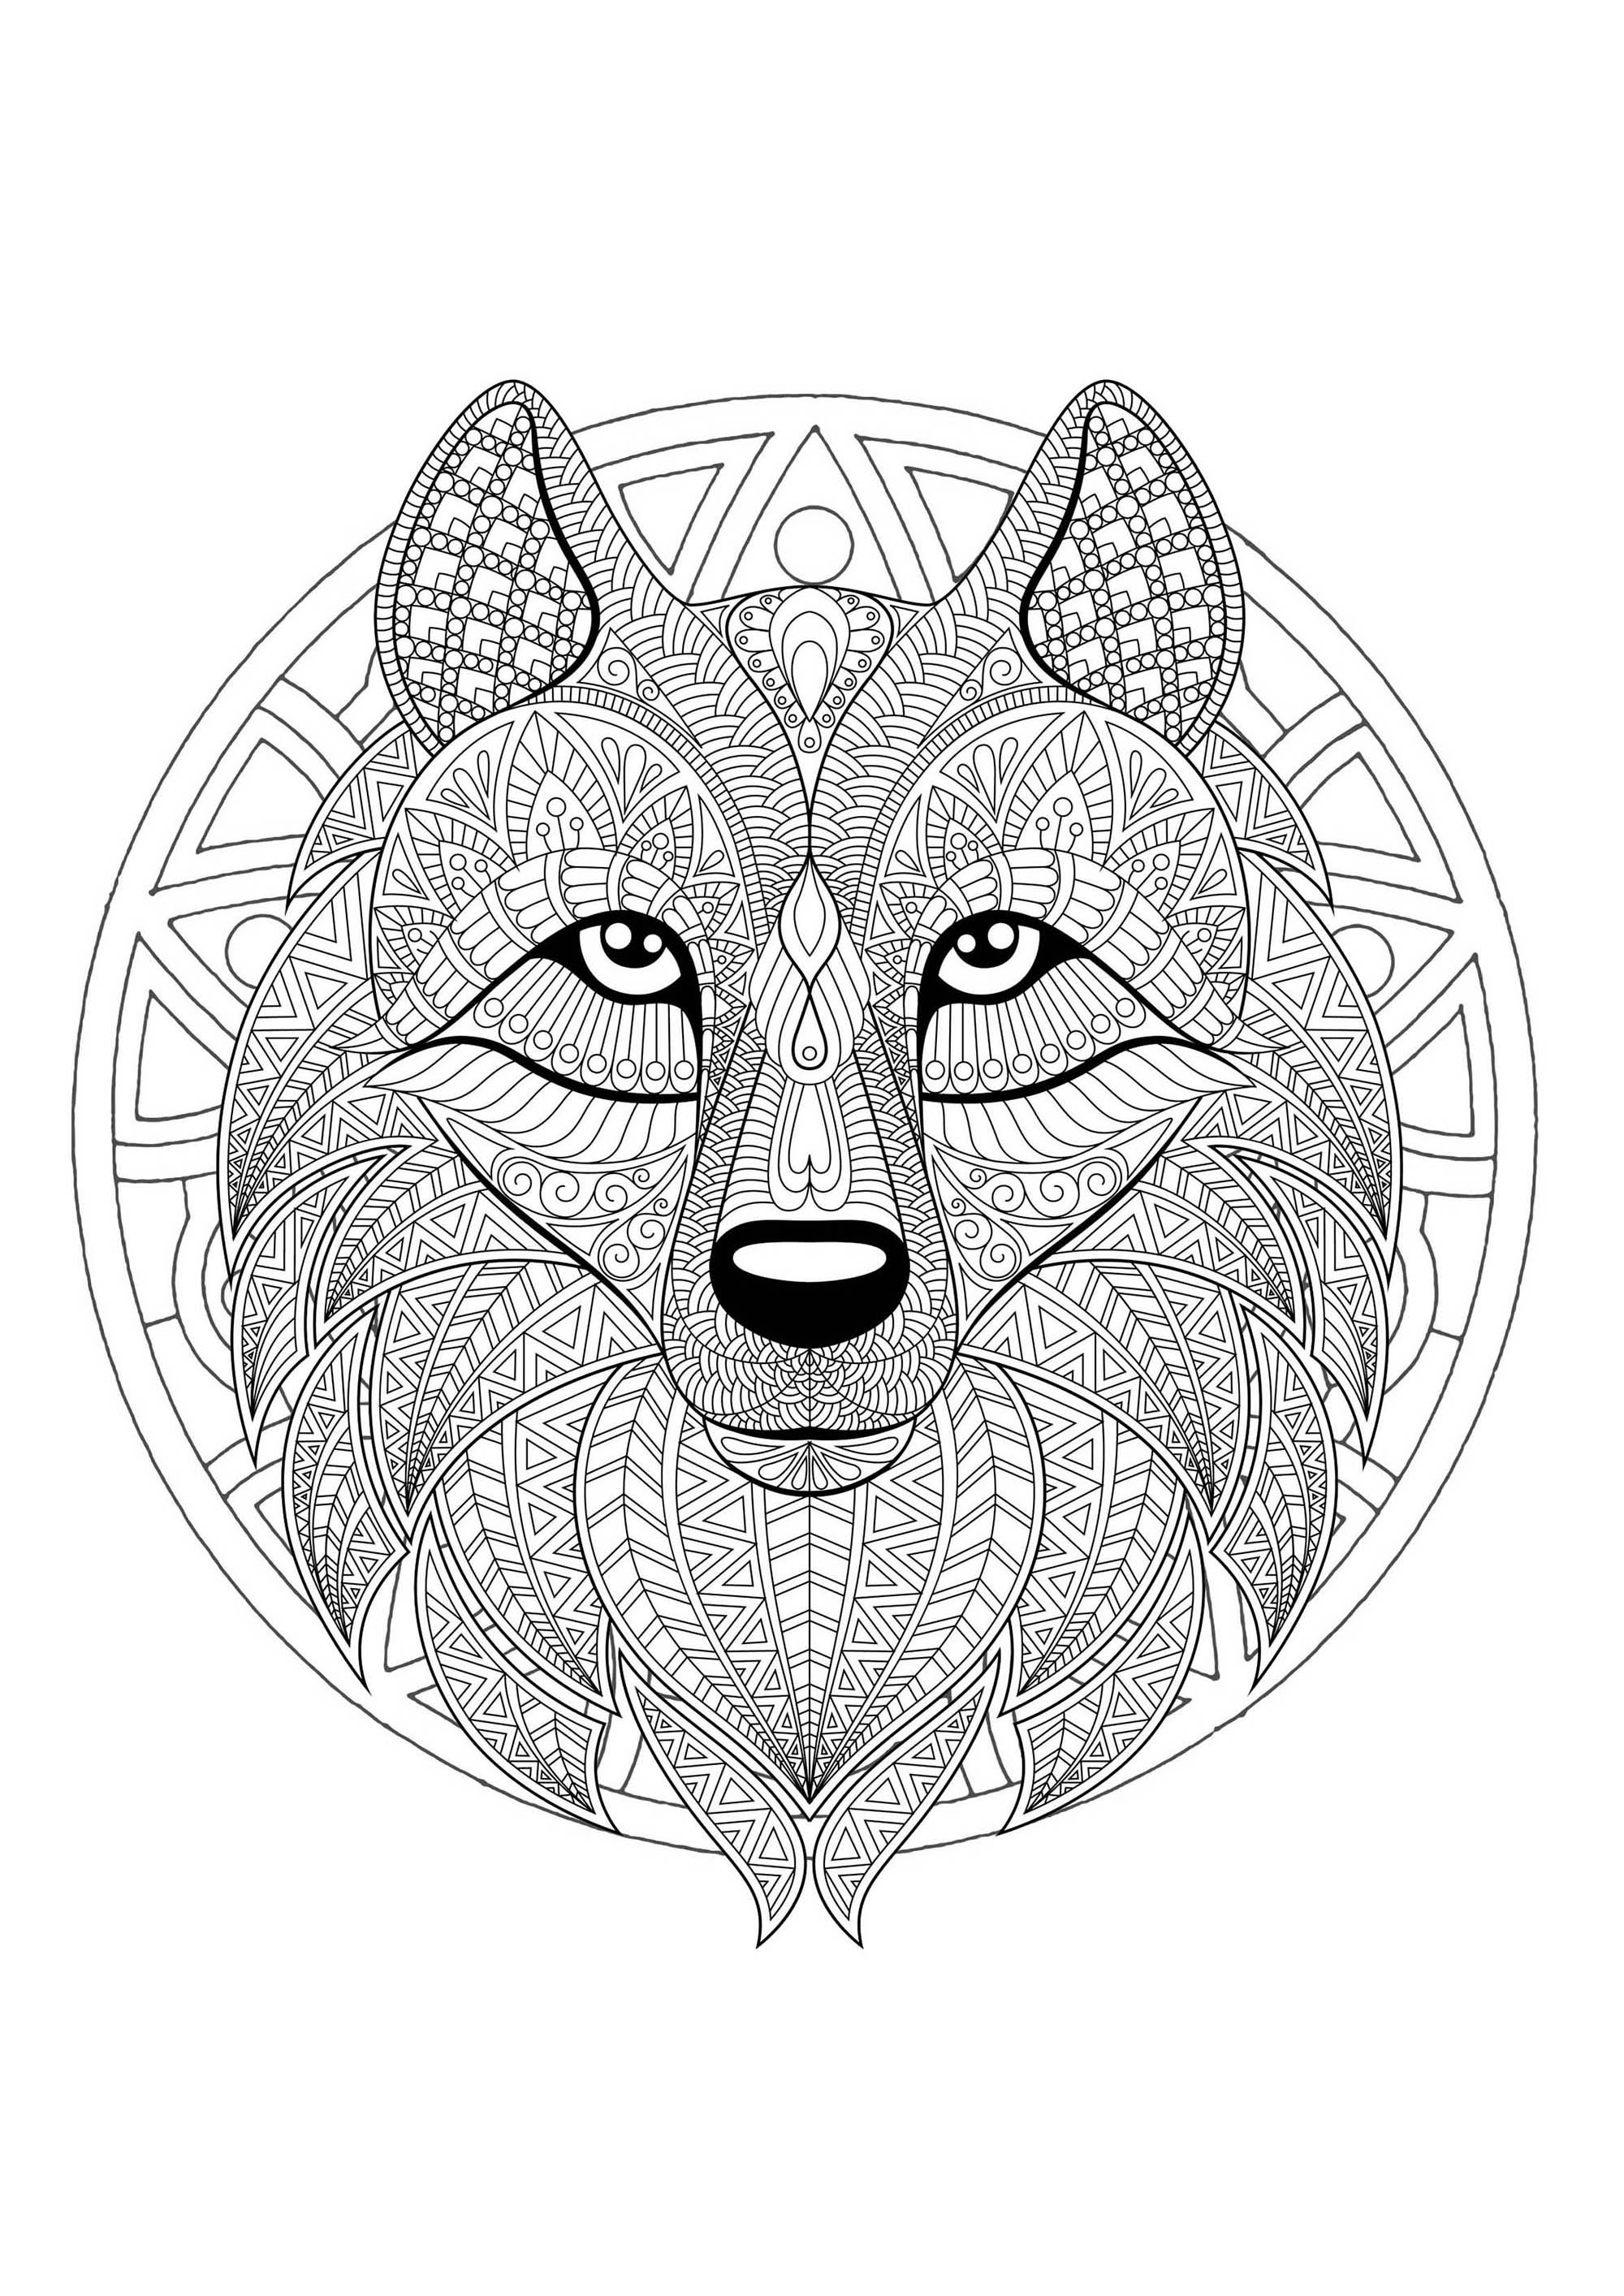 Mandala to color with patterns and incredible Wolf head